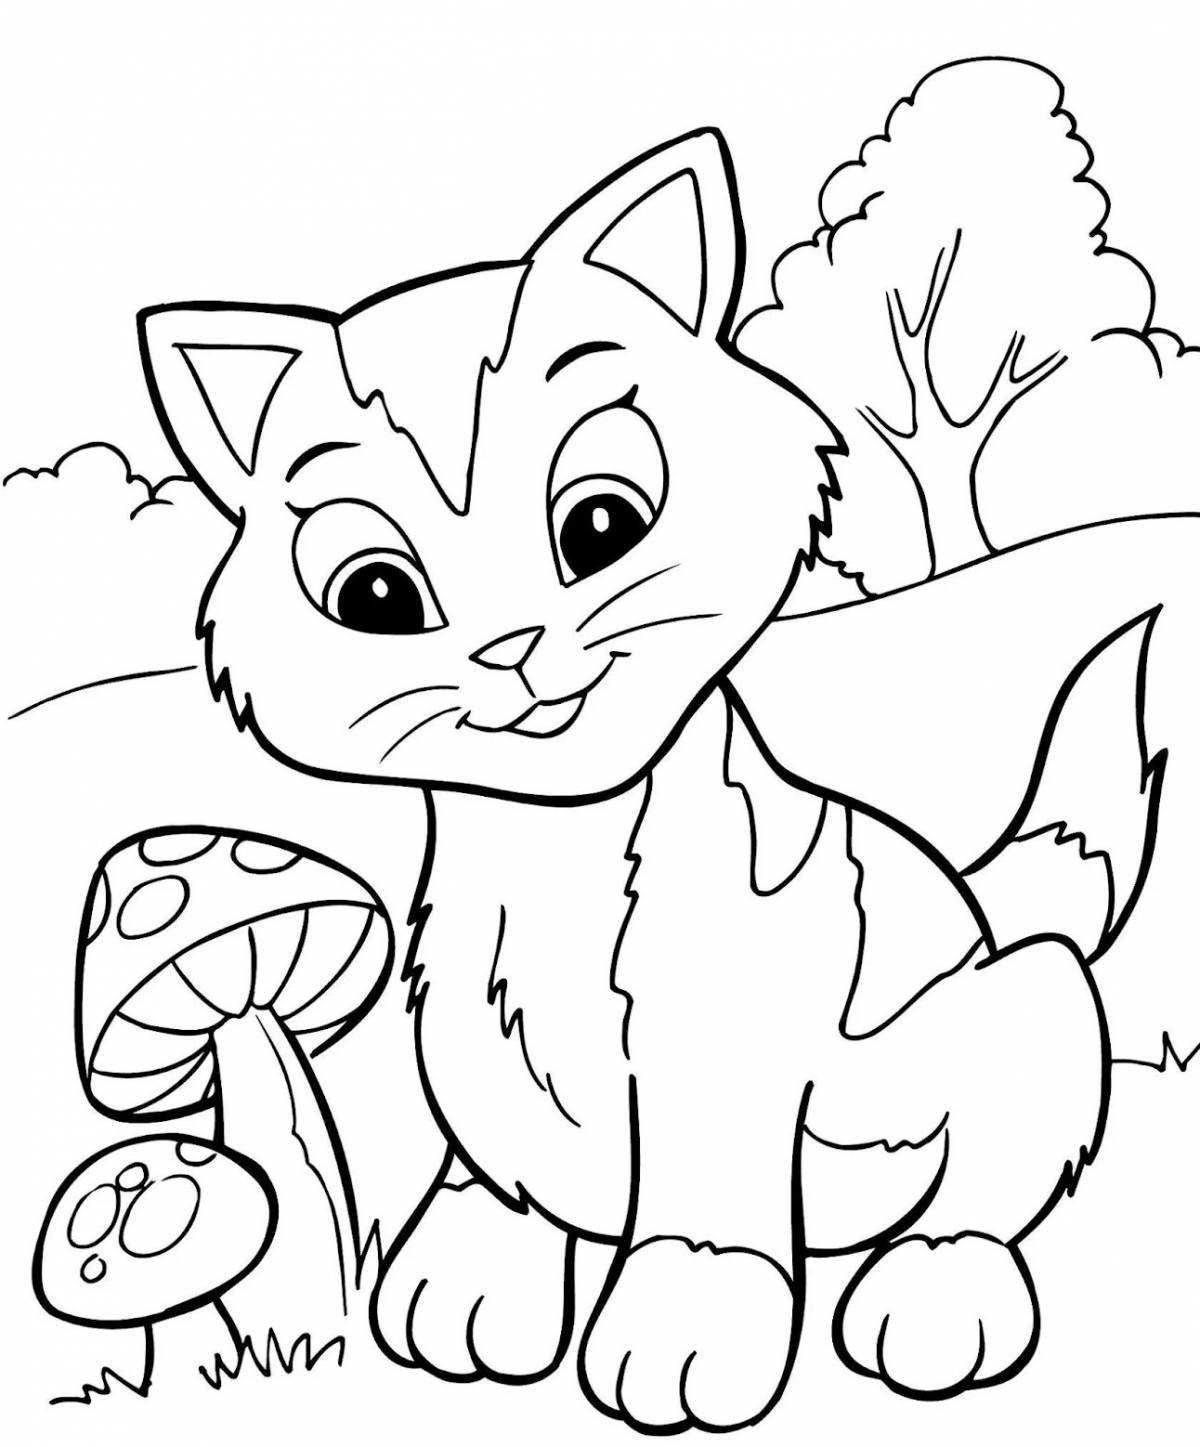 Witty cat coloring book for 4-5 year olds